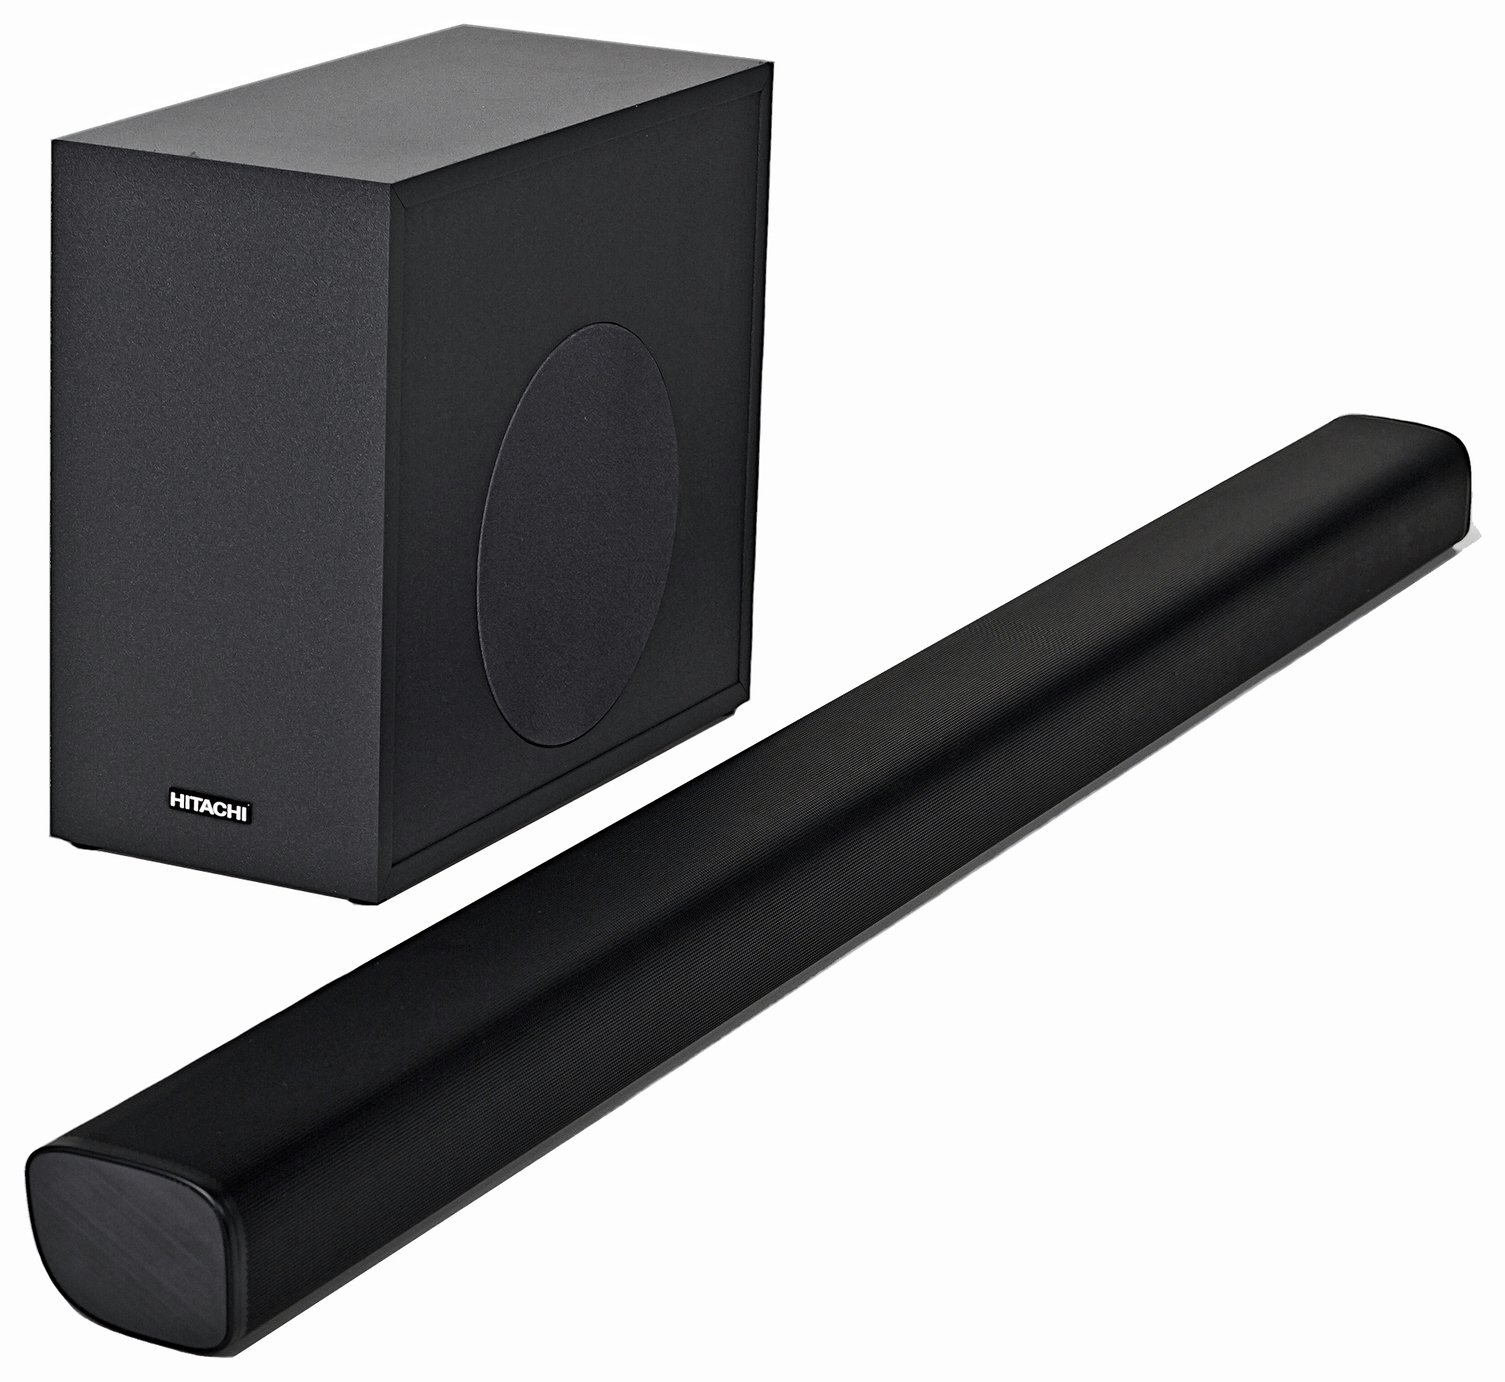 Hitachi 240W 2.1Ch Sound Bar with Wireless Subwoofer review